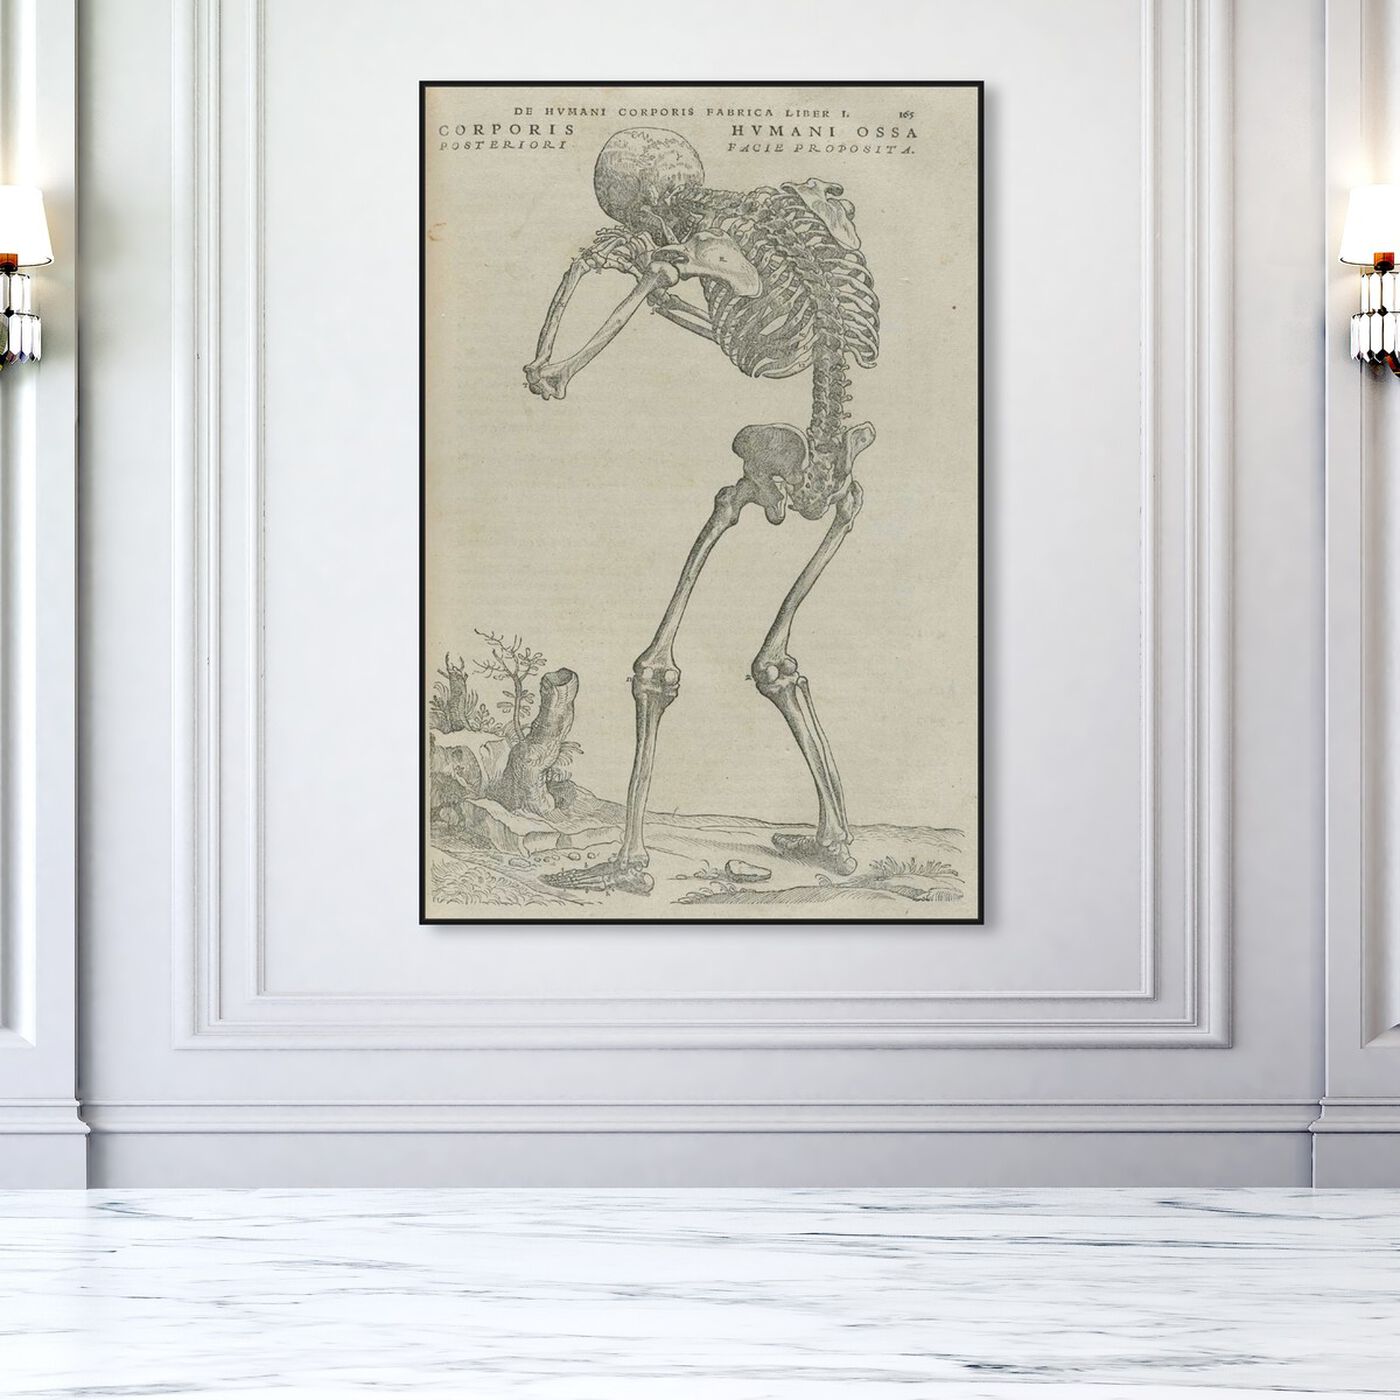 Hanging view of Vesalius VI - The Art Cabinet featuring classic and figurative and classical figures art.